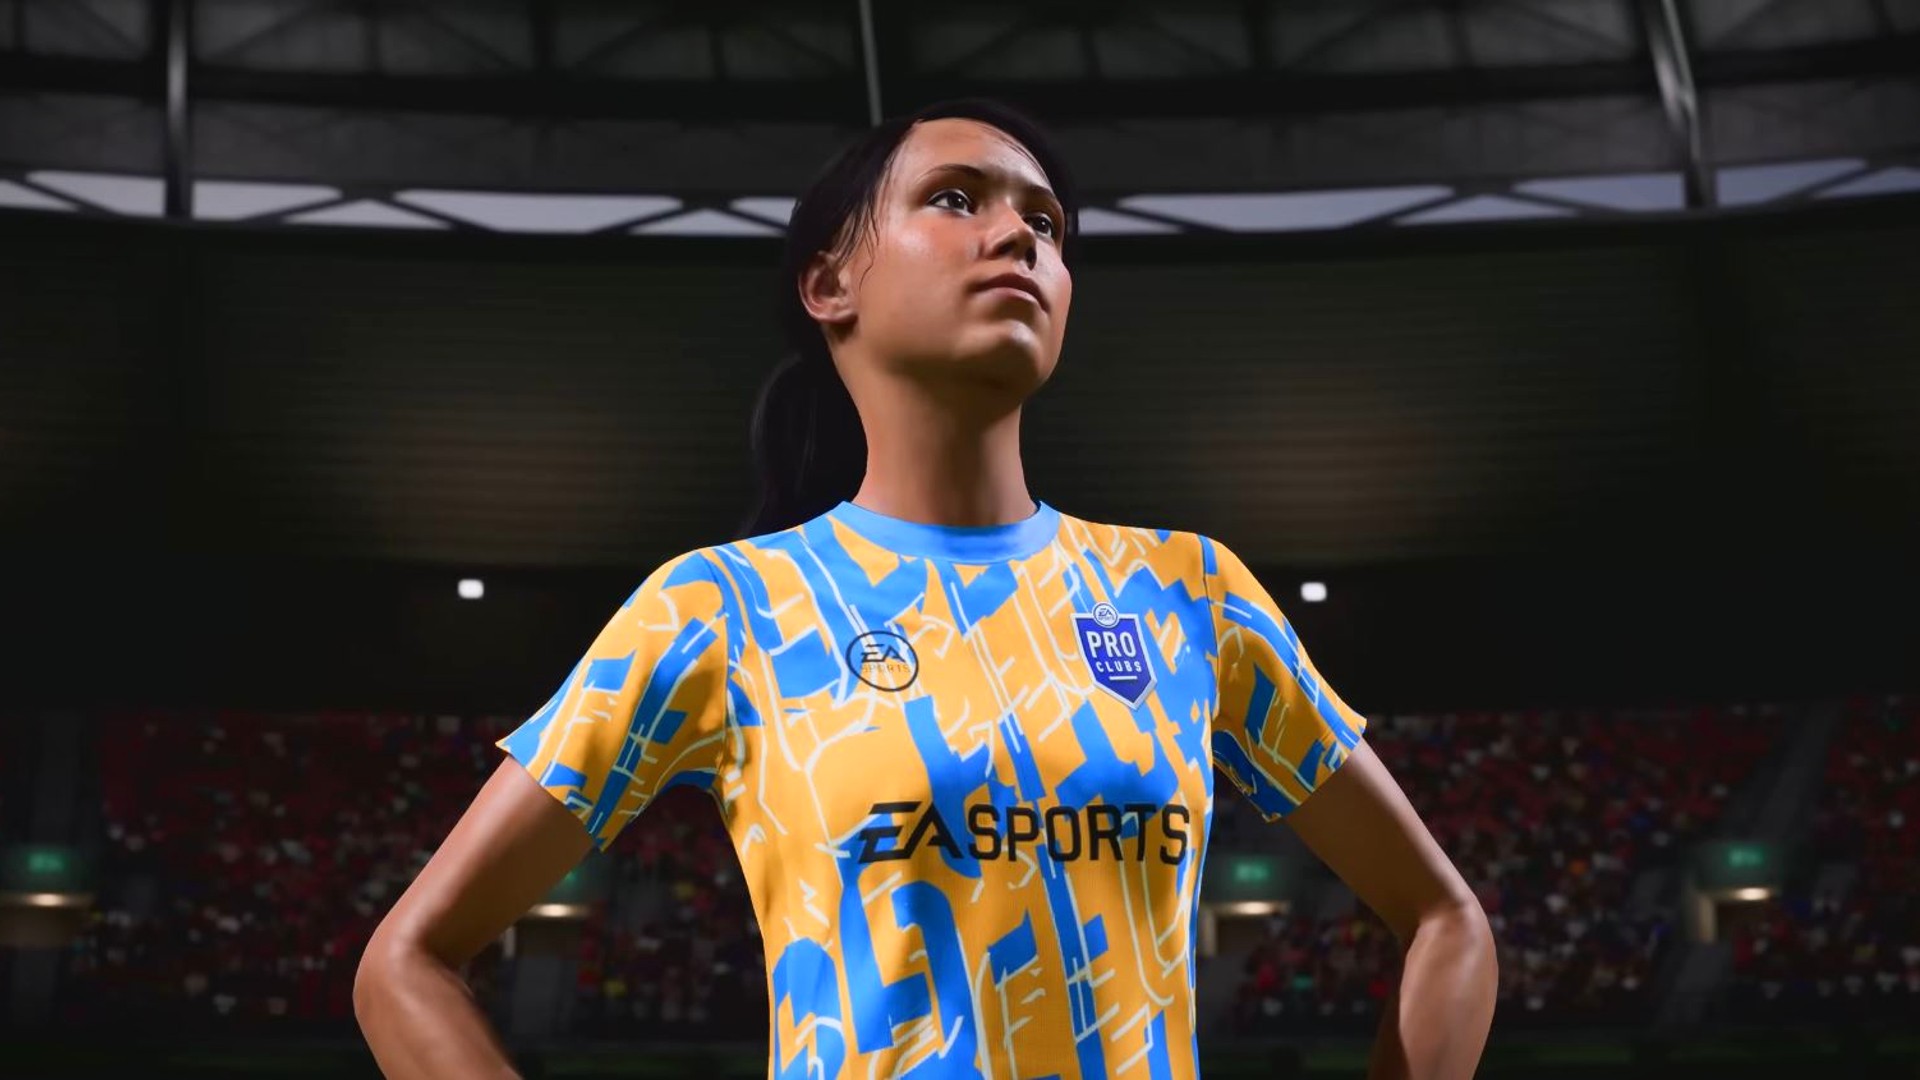 FIFA 23 devs “focused” on bringing cross-play to Pro Clubs | The Loadout